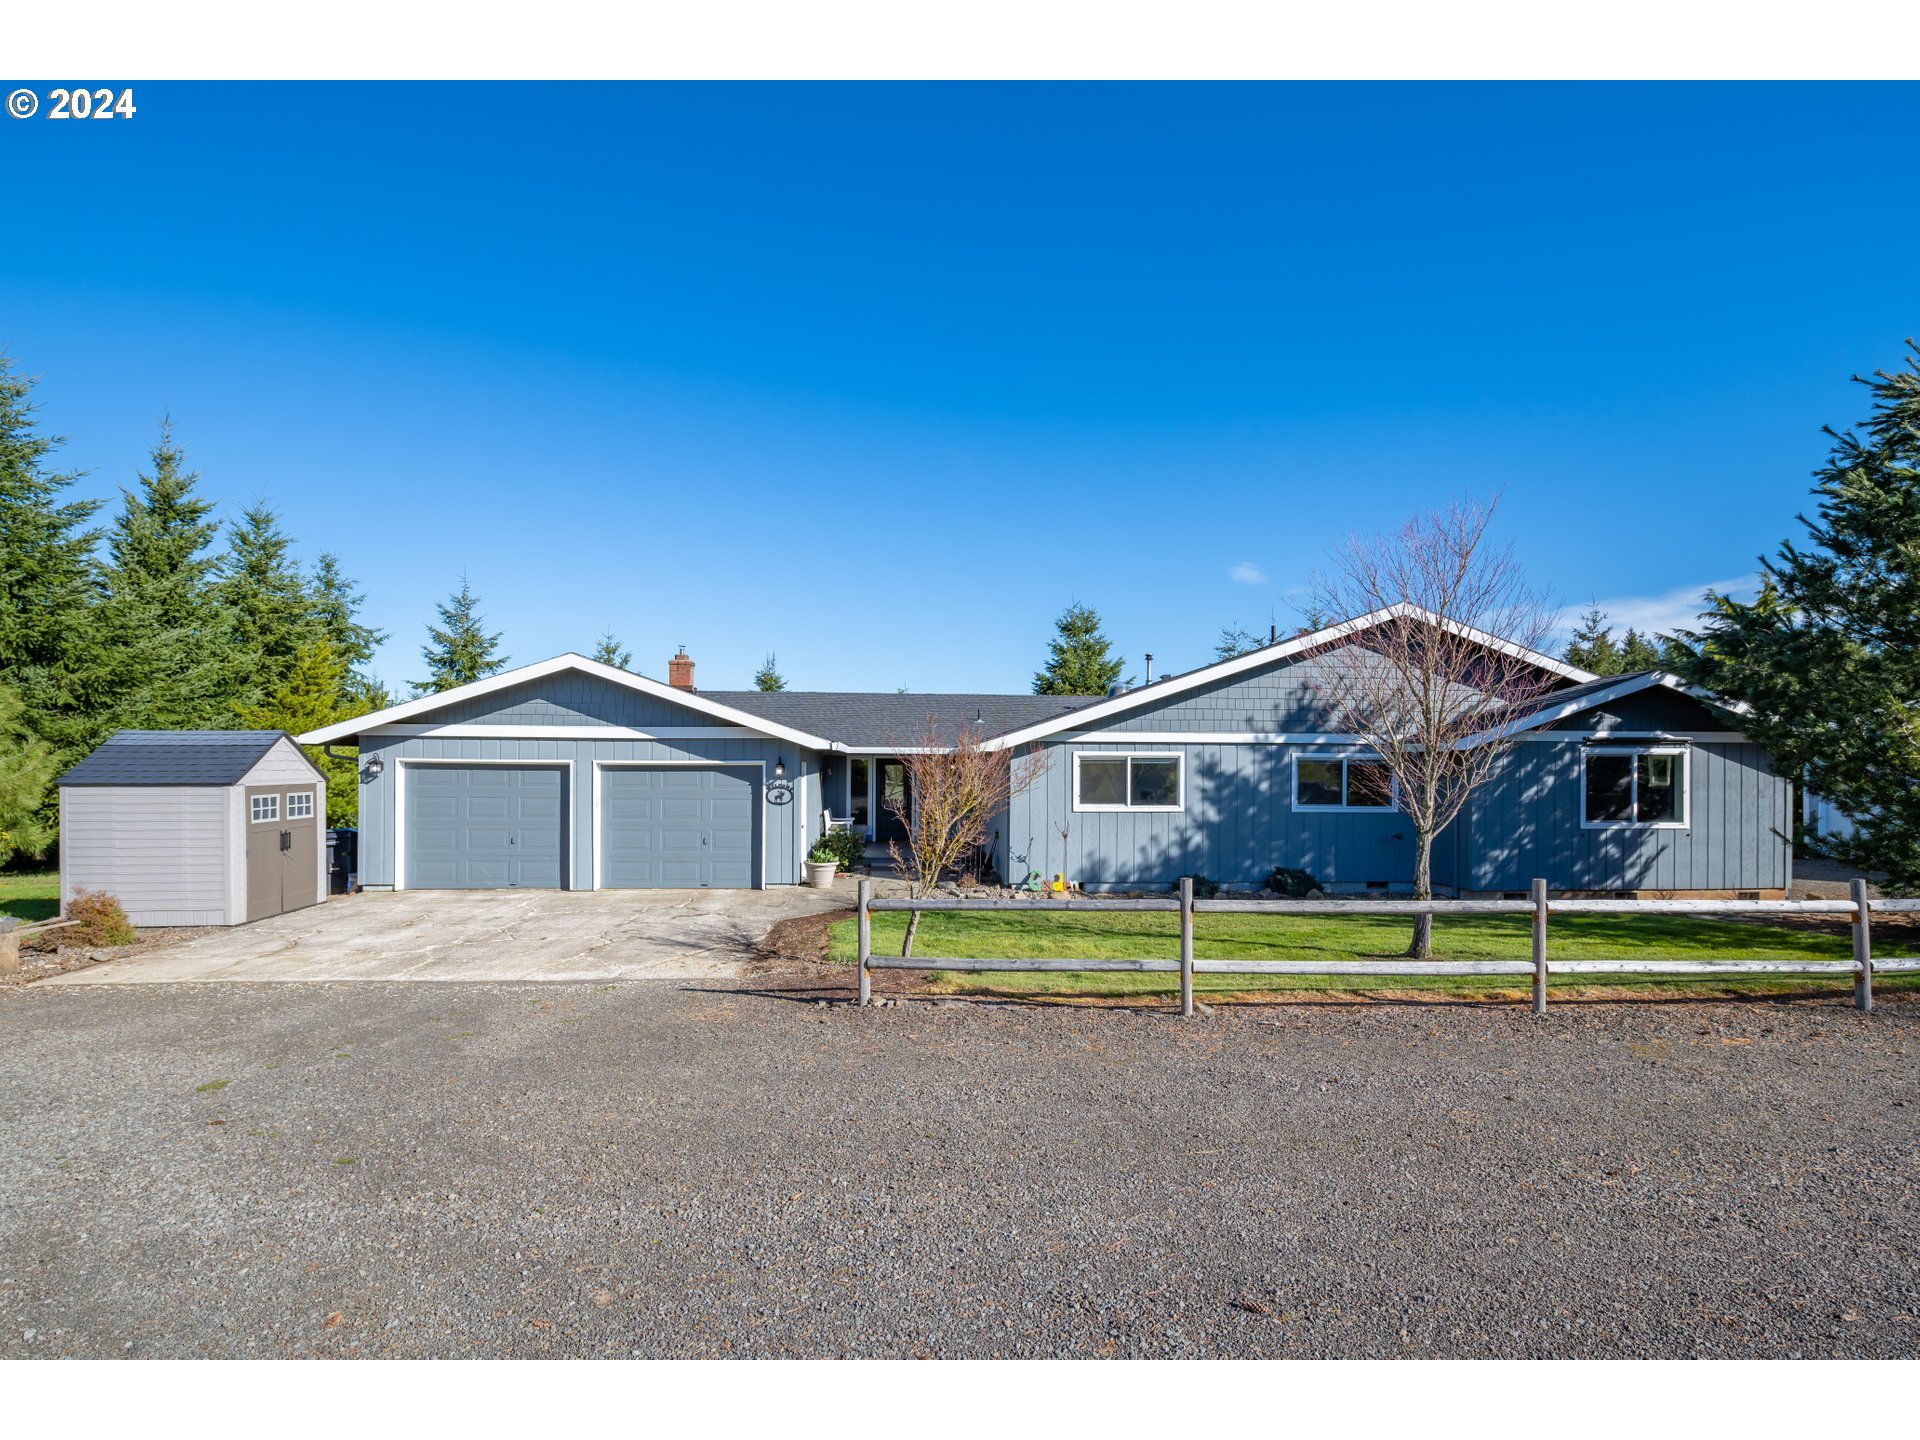 36076 S SAWTELL RD, Molalla, OR 